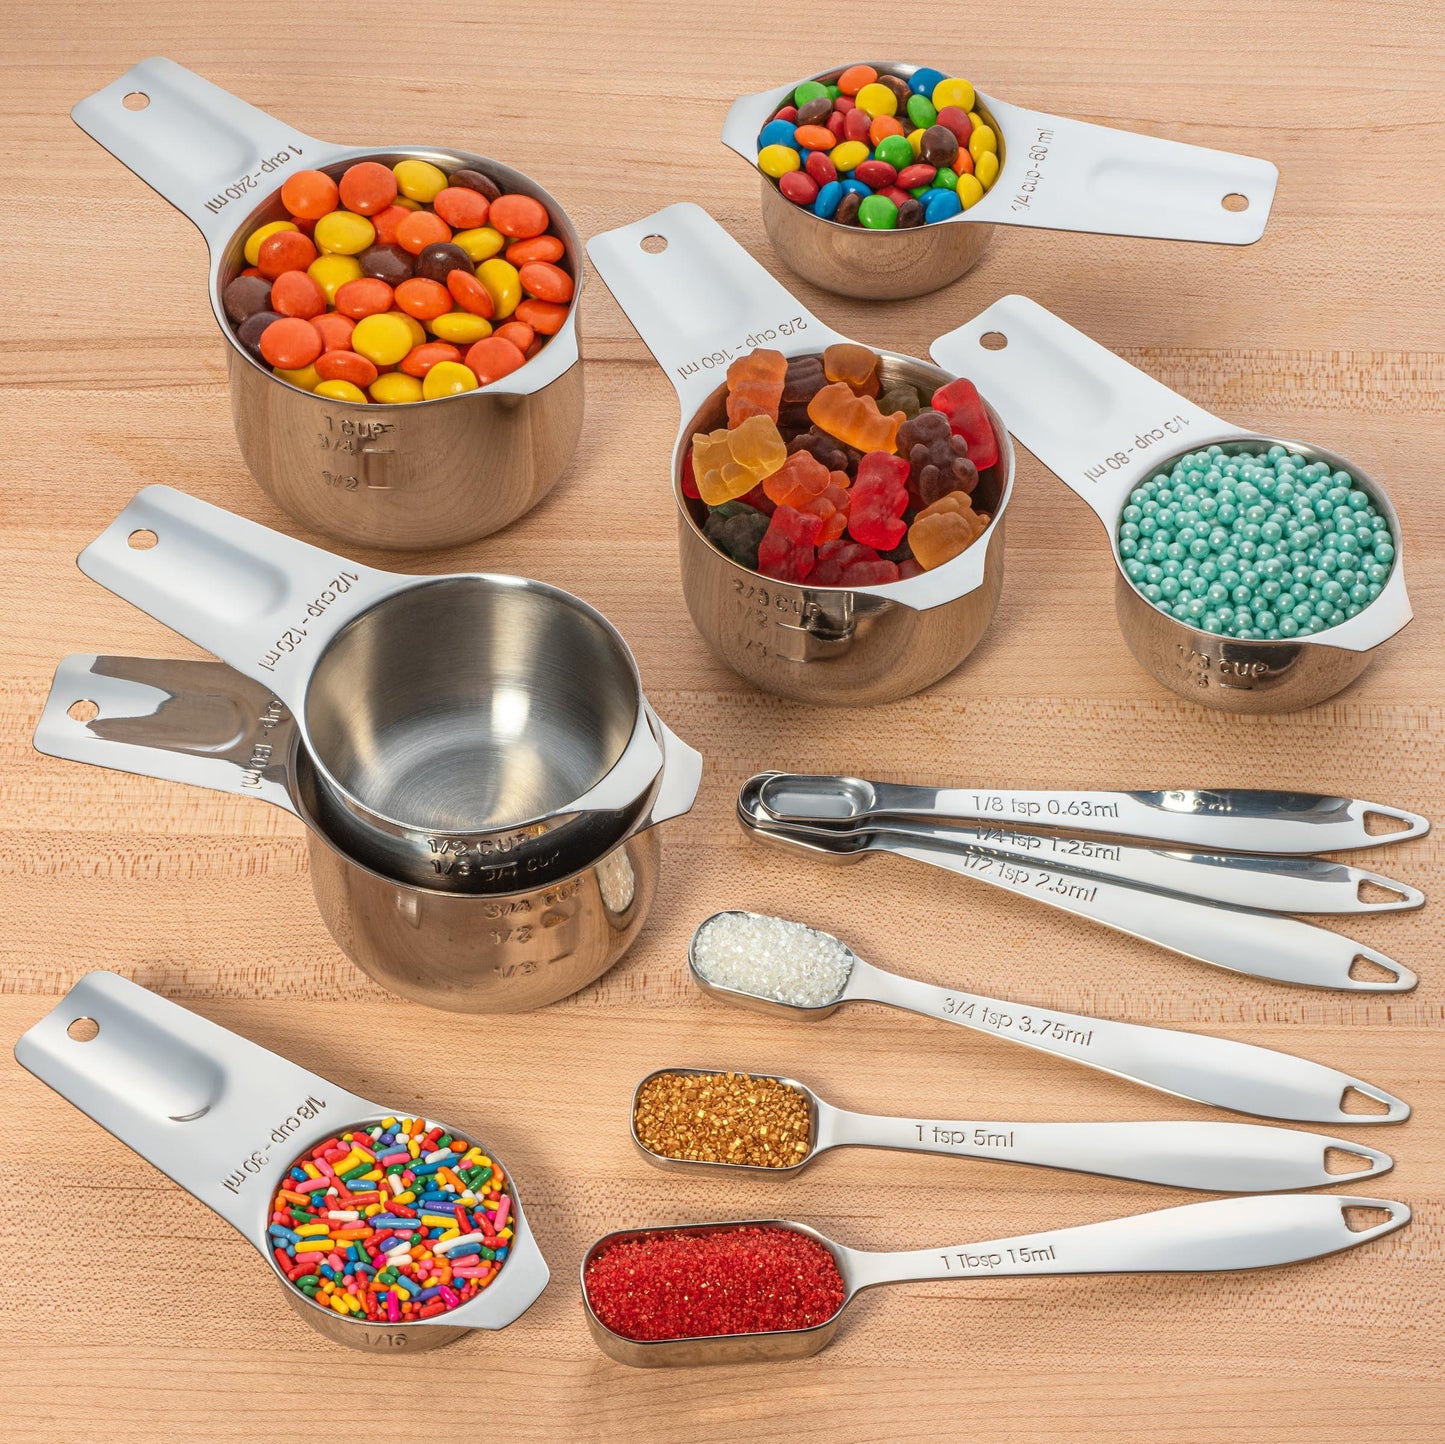 Stainless Steel Measuring Cups And Spoons Set - 13 Piece - Metal Kitchen Accessories For Cooking And Baking - Professional, Dishwasher Safe, Nesting, Stackable Design For Liquid And Dry Ingredients. - CookCave